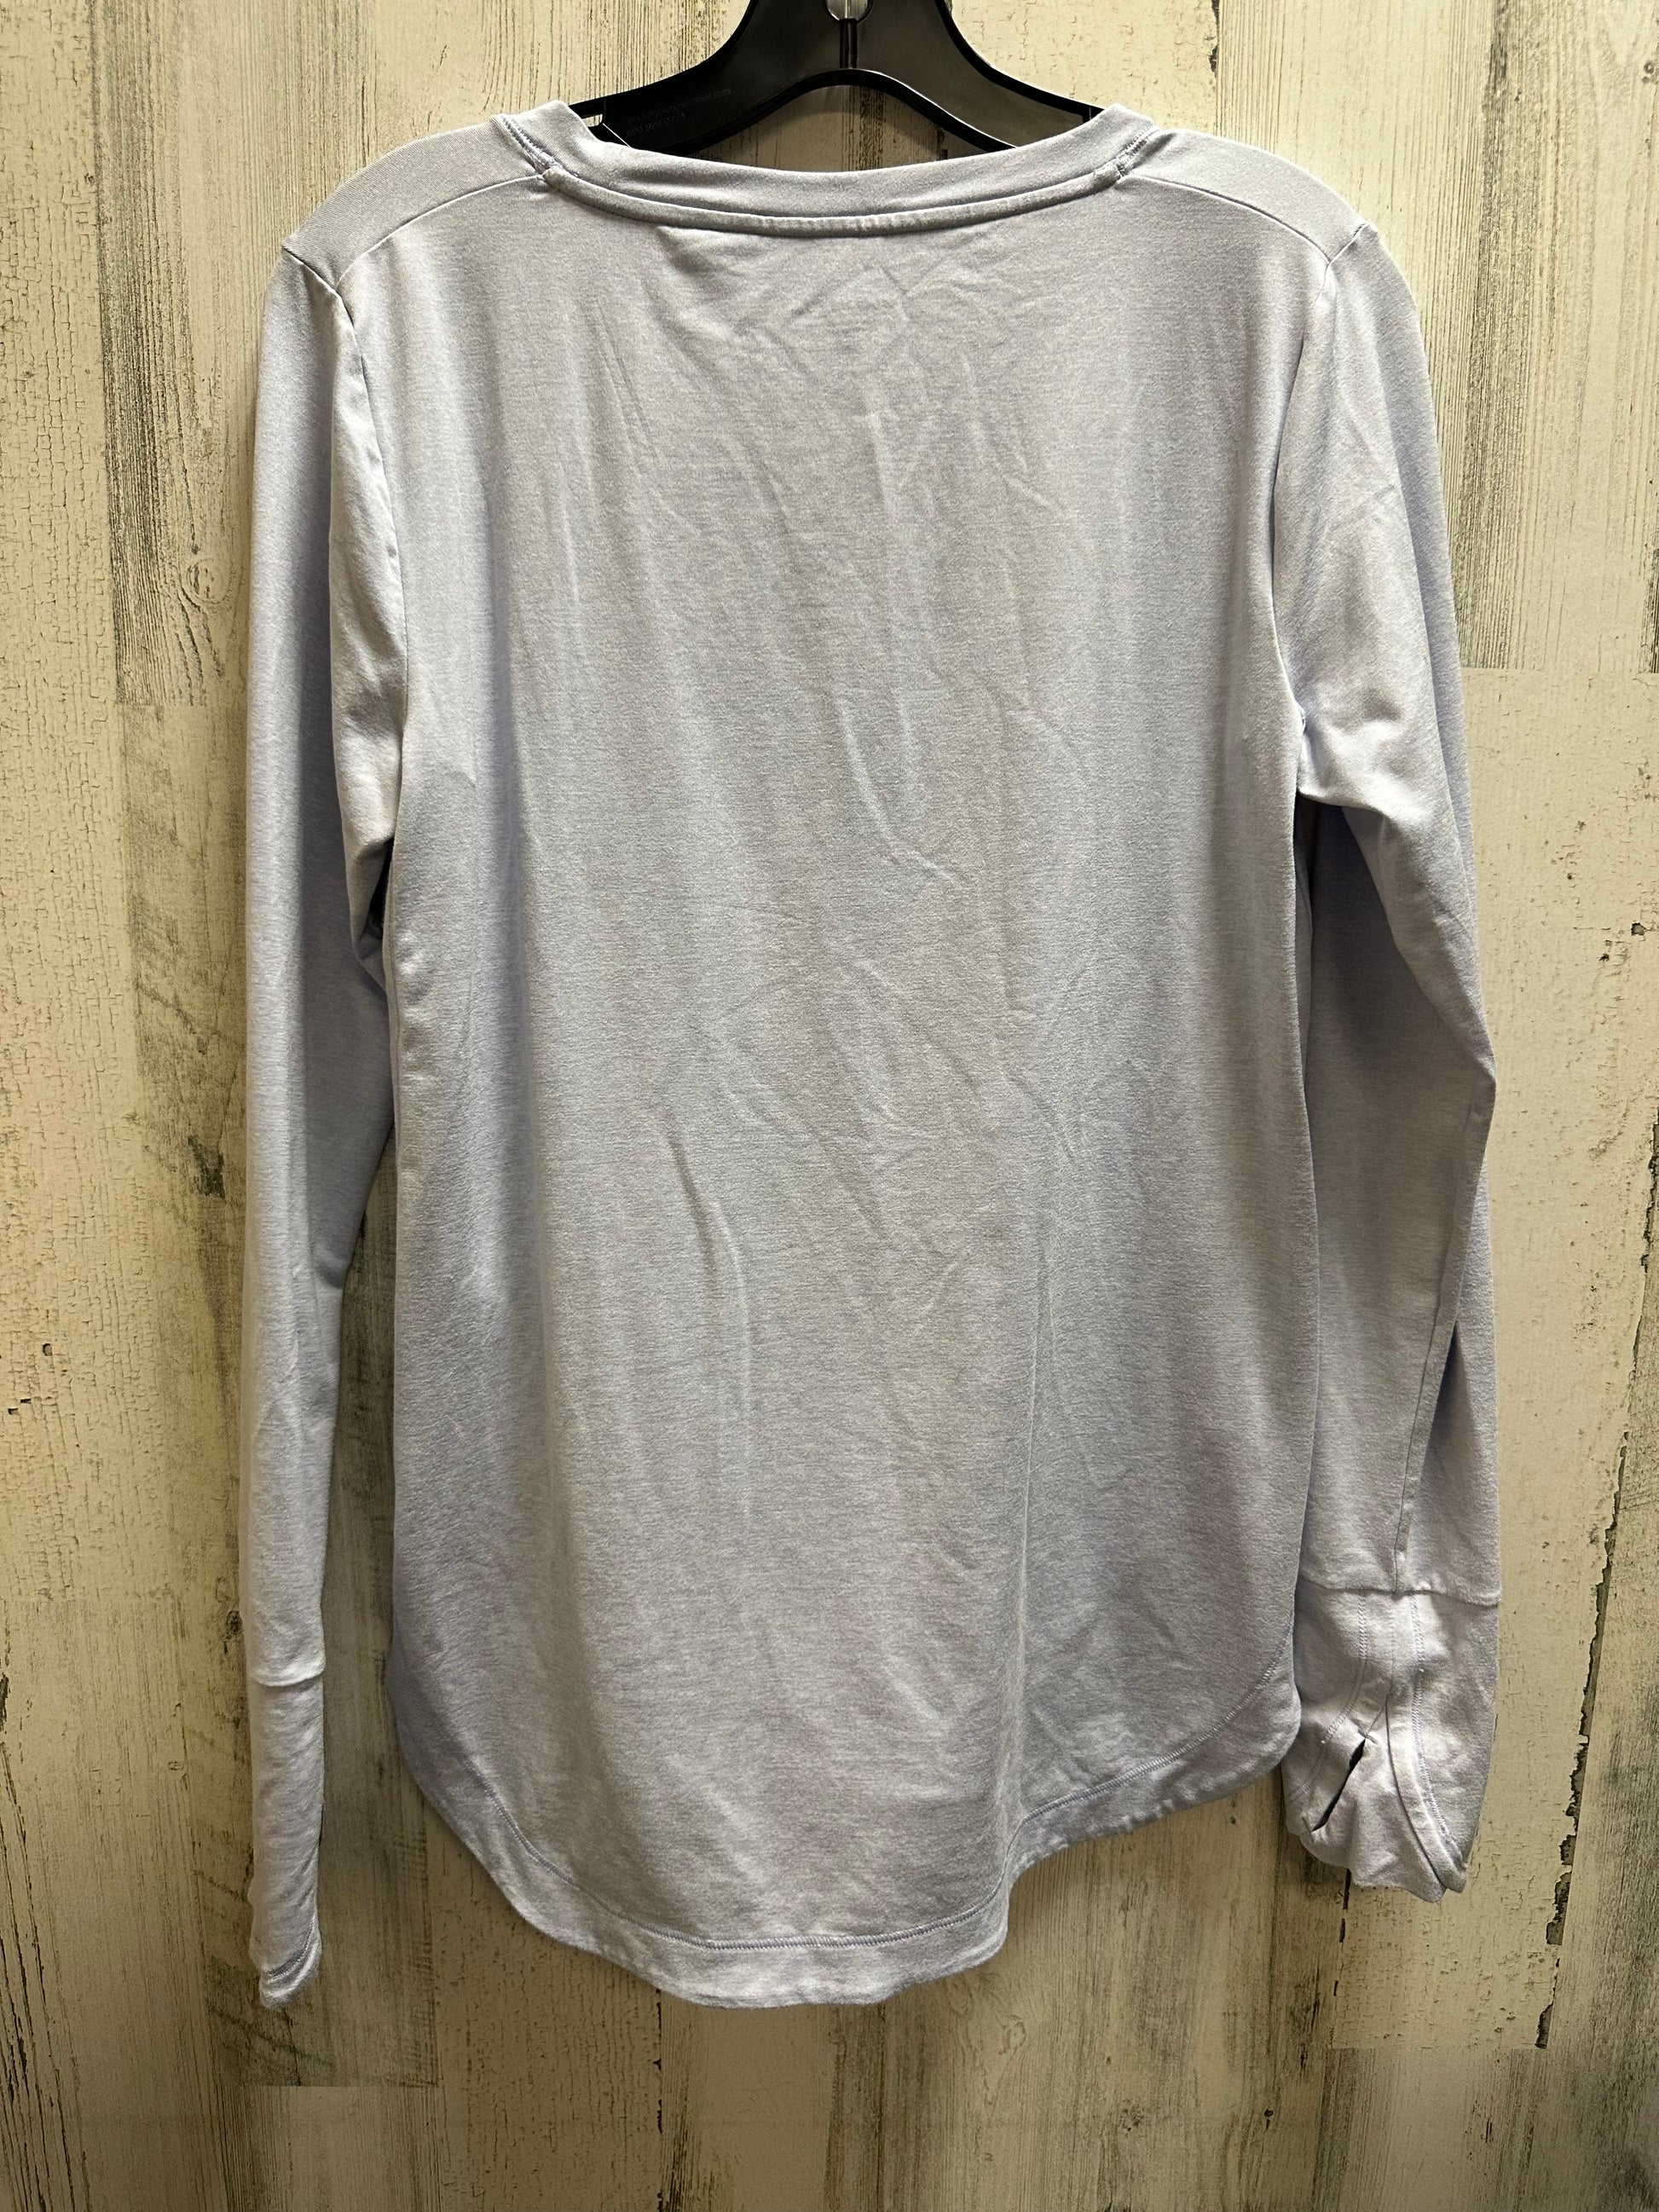 Athletic Top Long Sleeve Crewneck By Athleta Size: S – Clothes